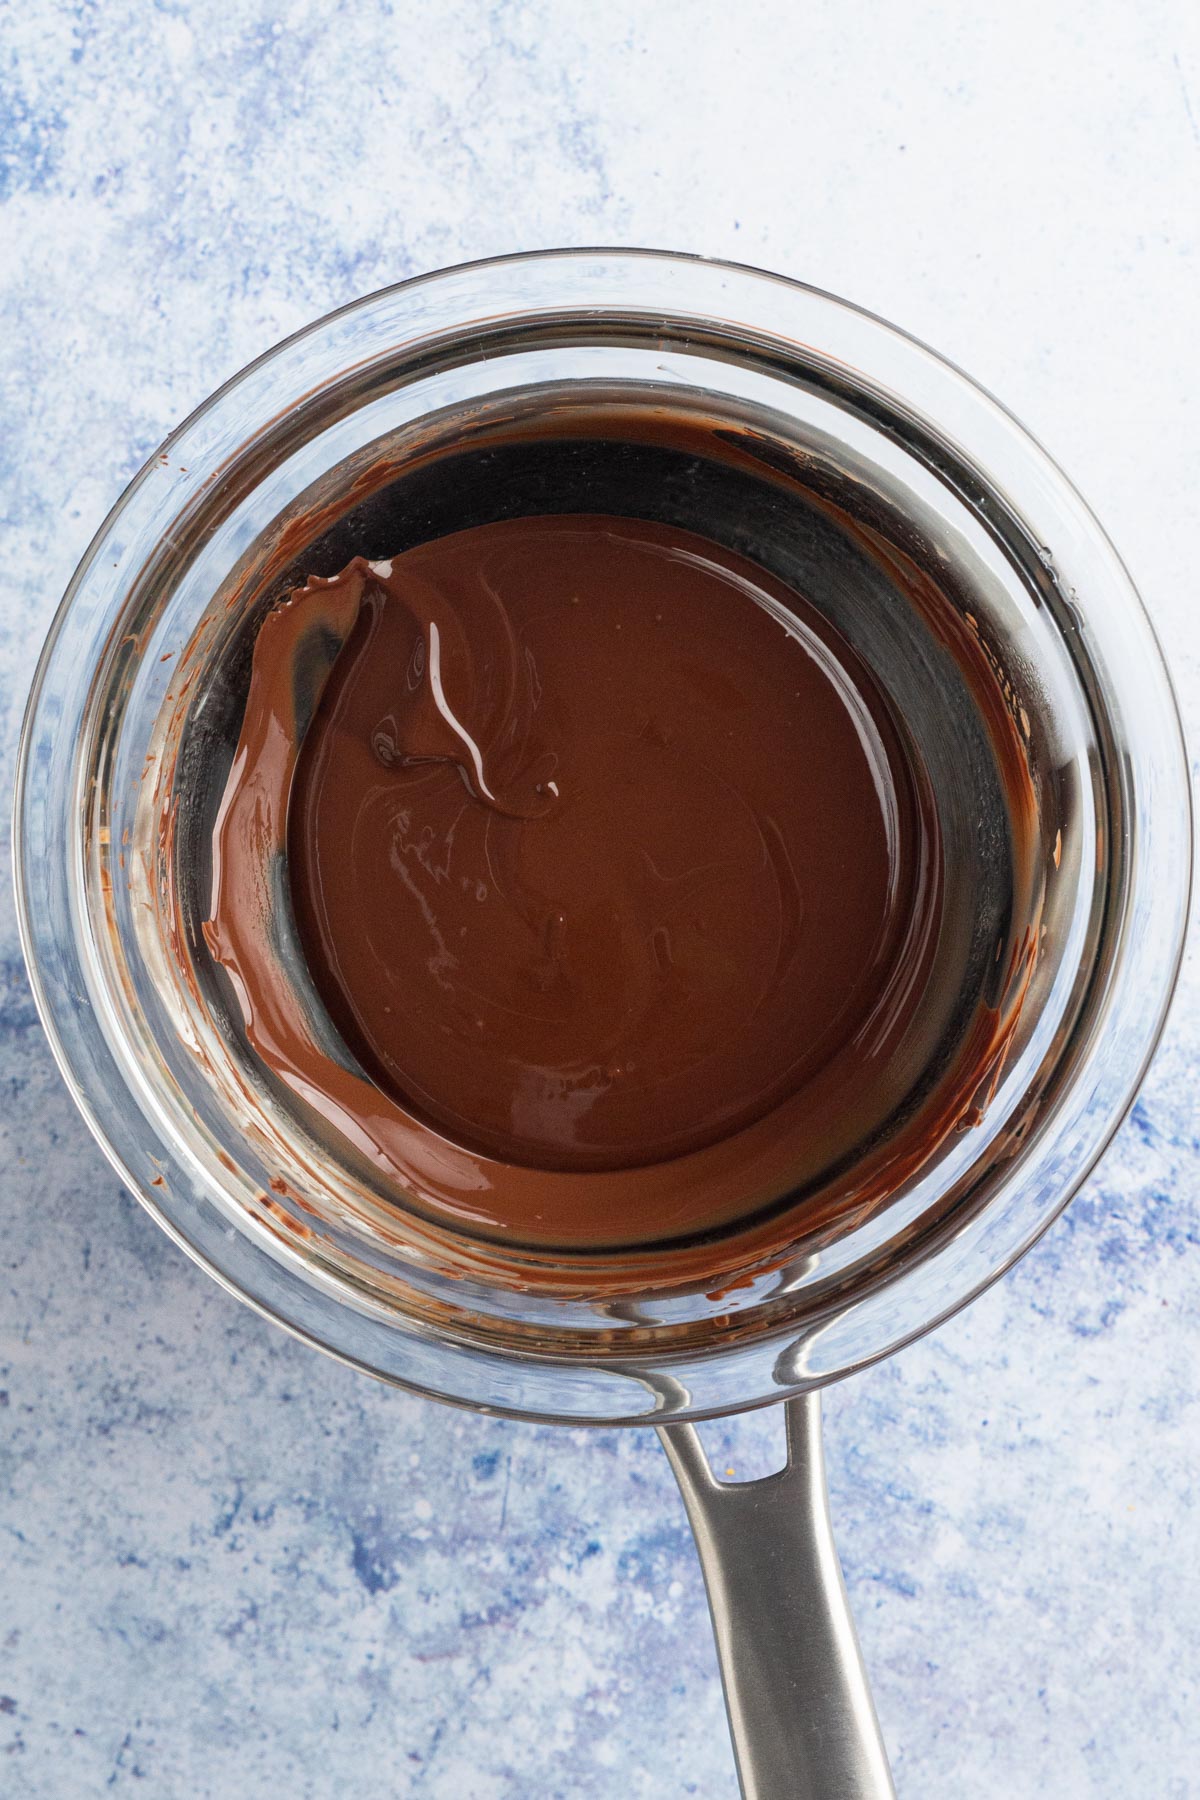 Melted chocolate in a DIY double boiler on a blue surface.